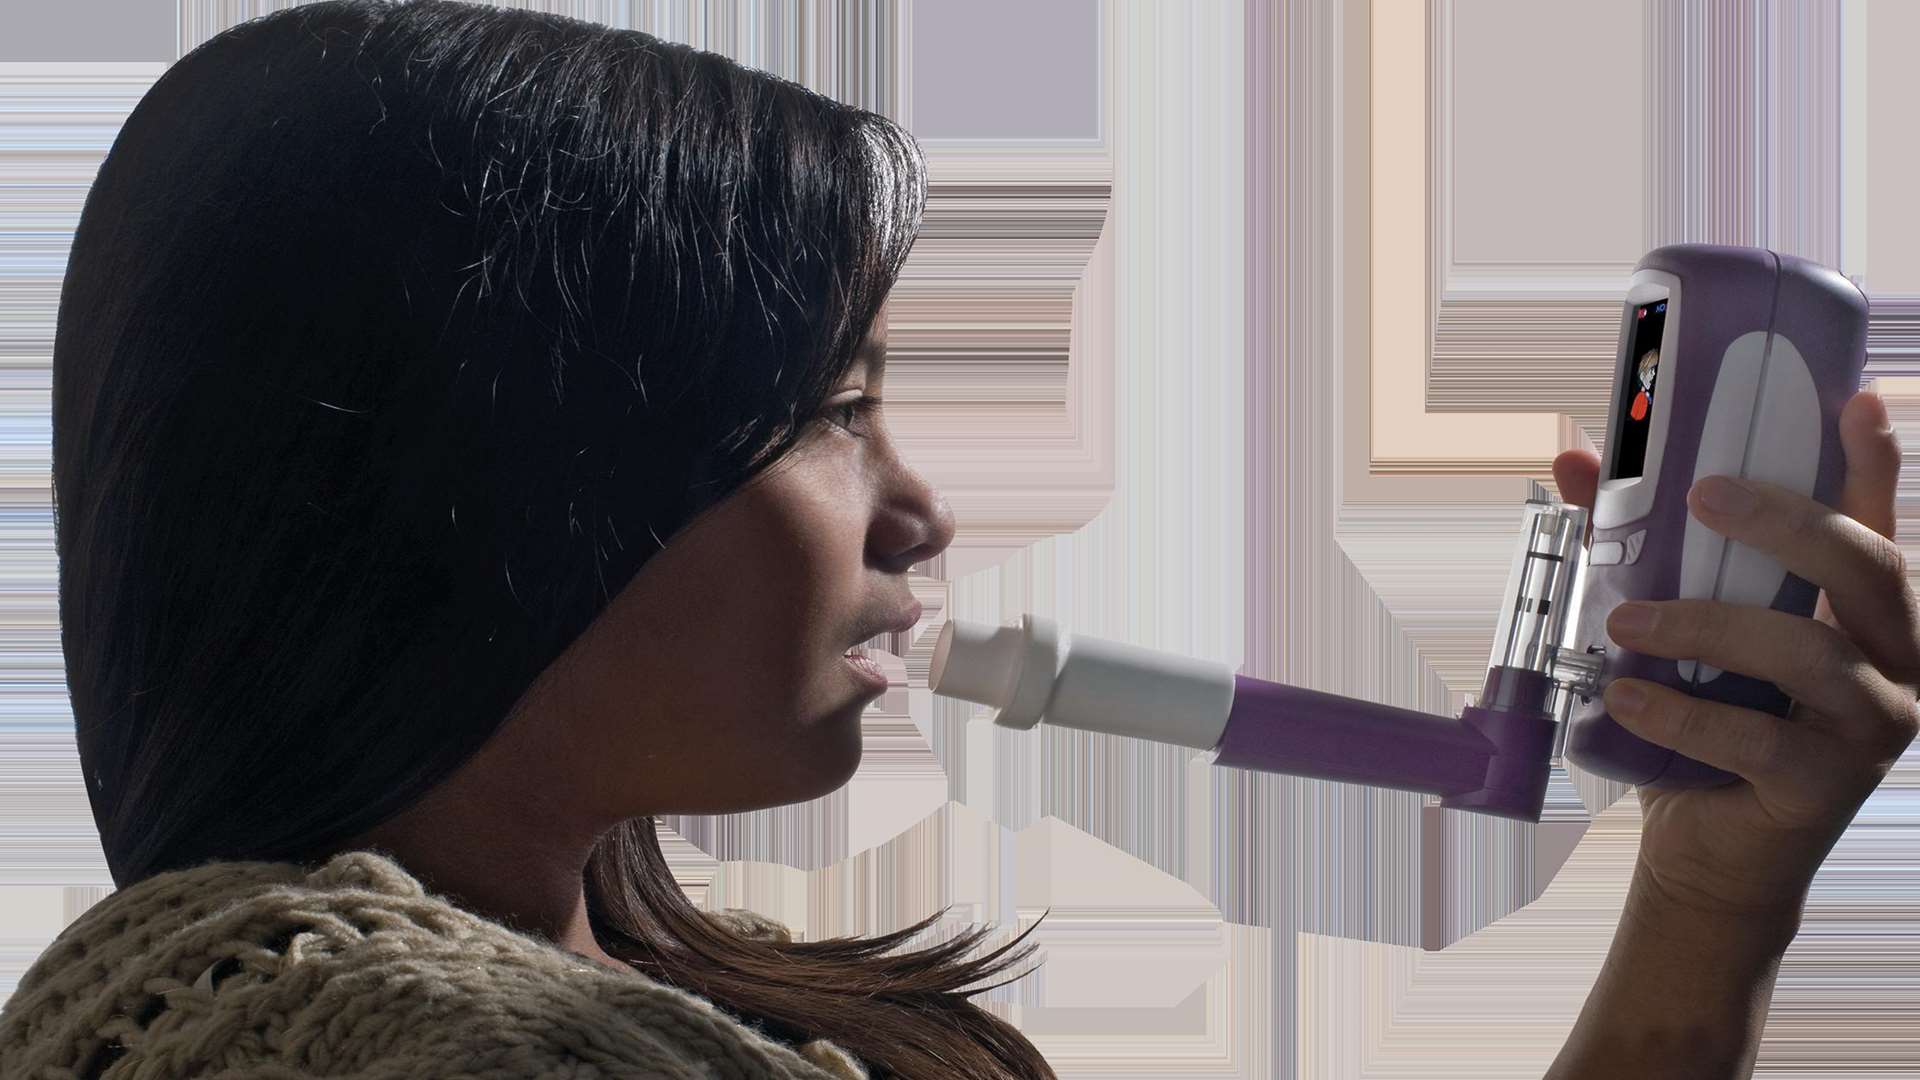 Bedfont Scientific is expecting profits to soar thanks to one of its asthma detecting products